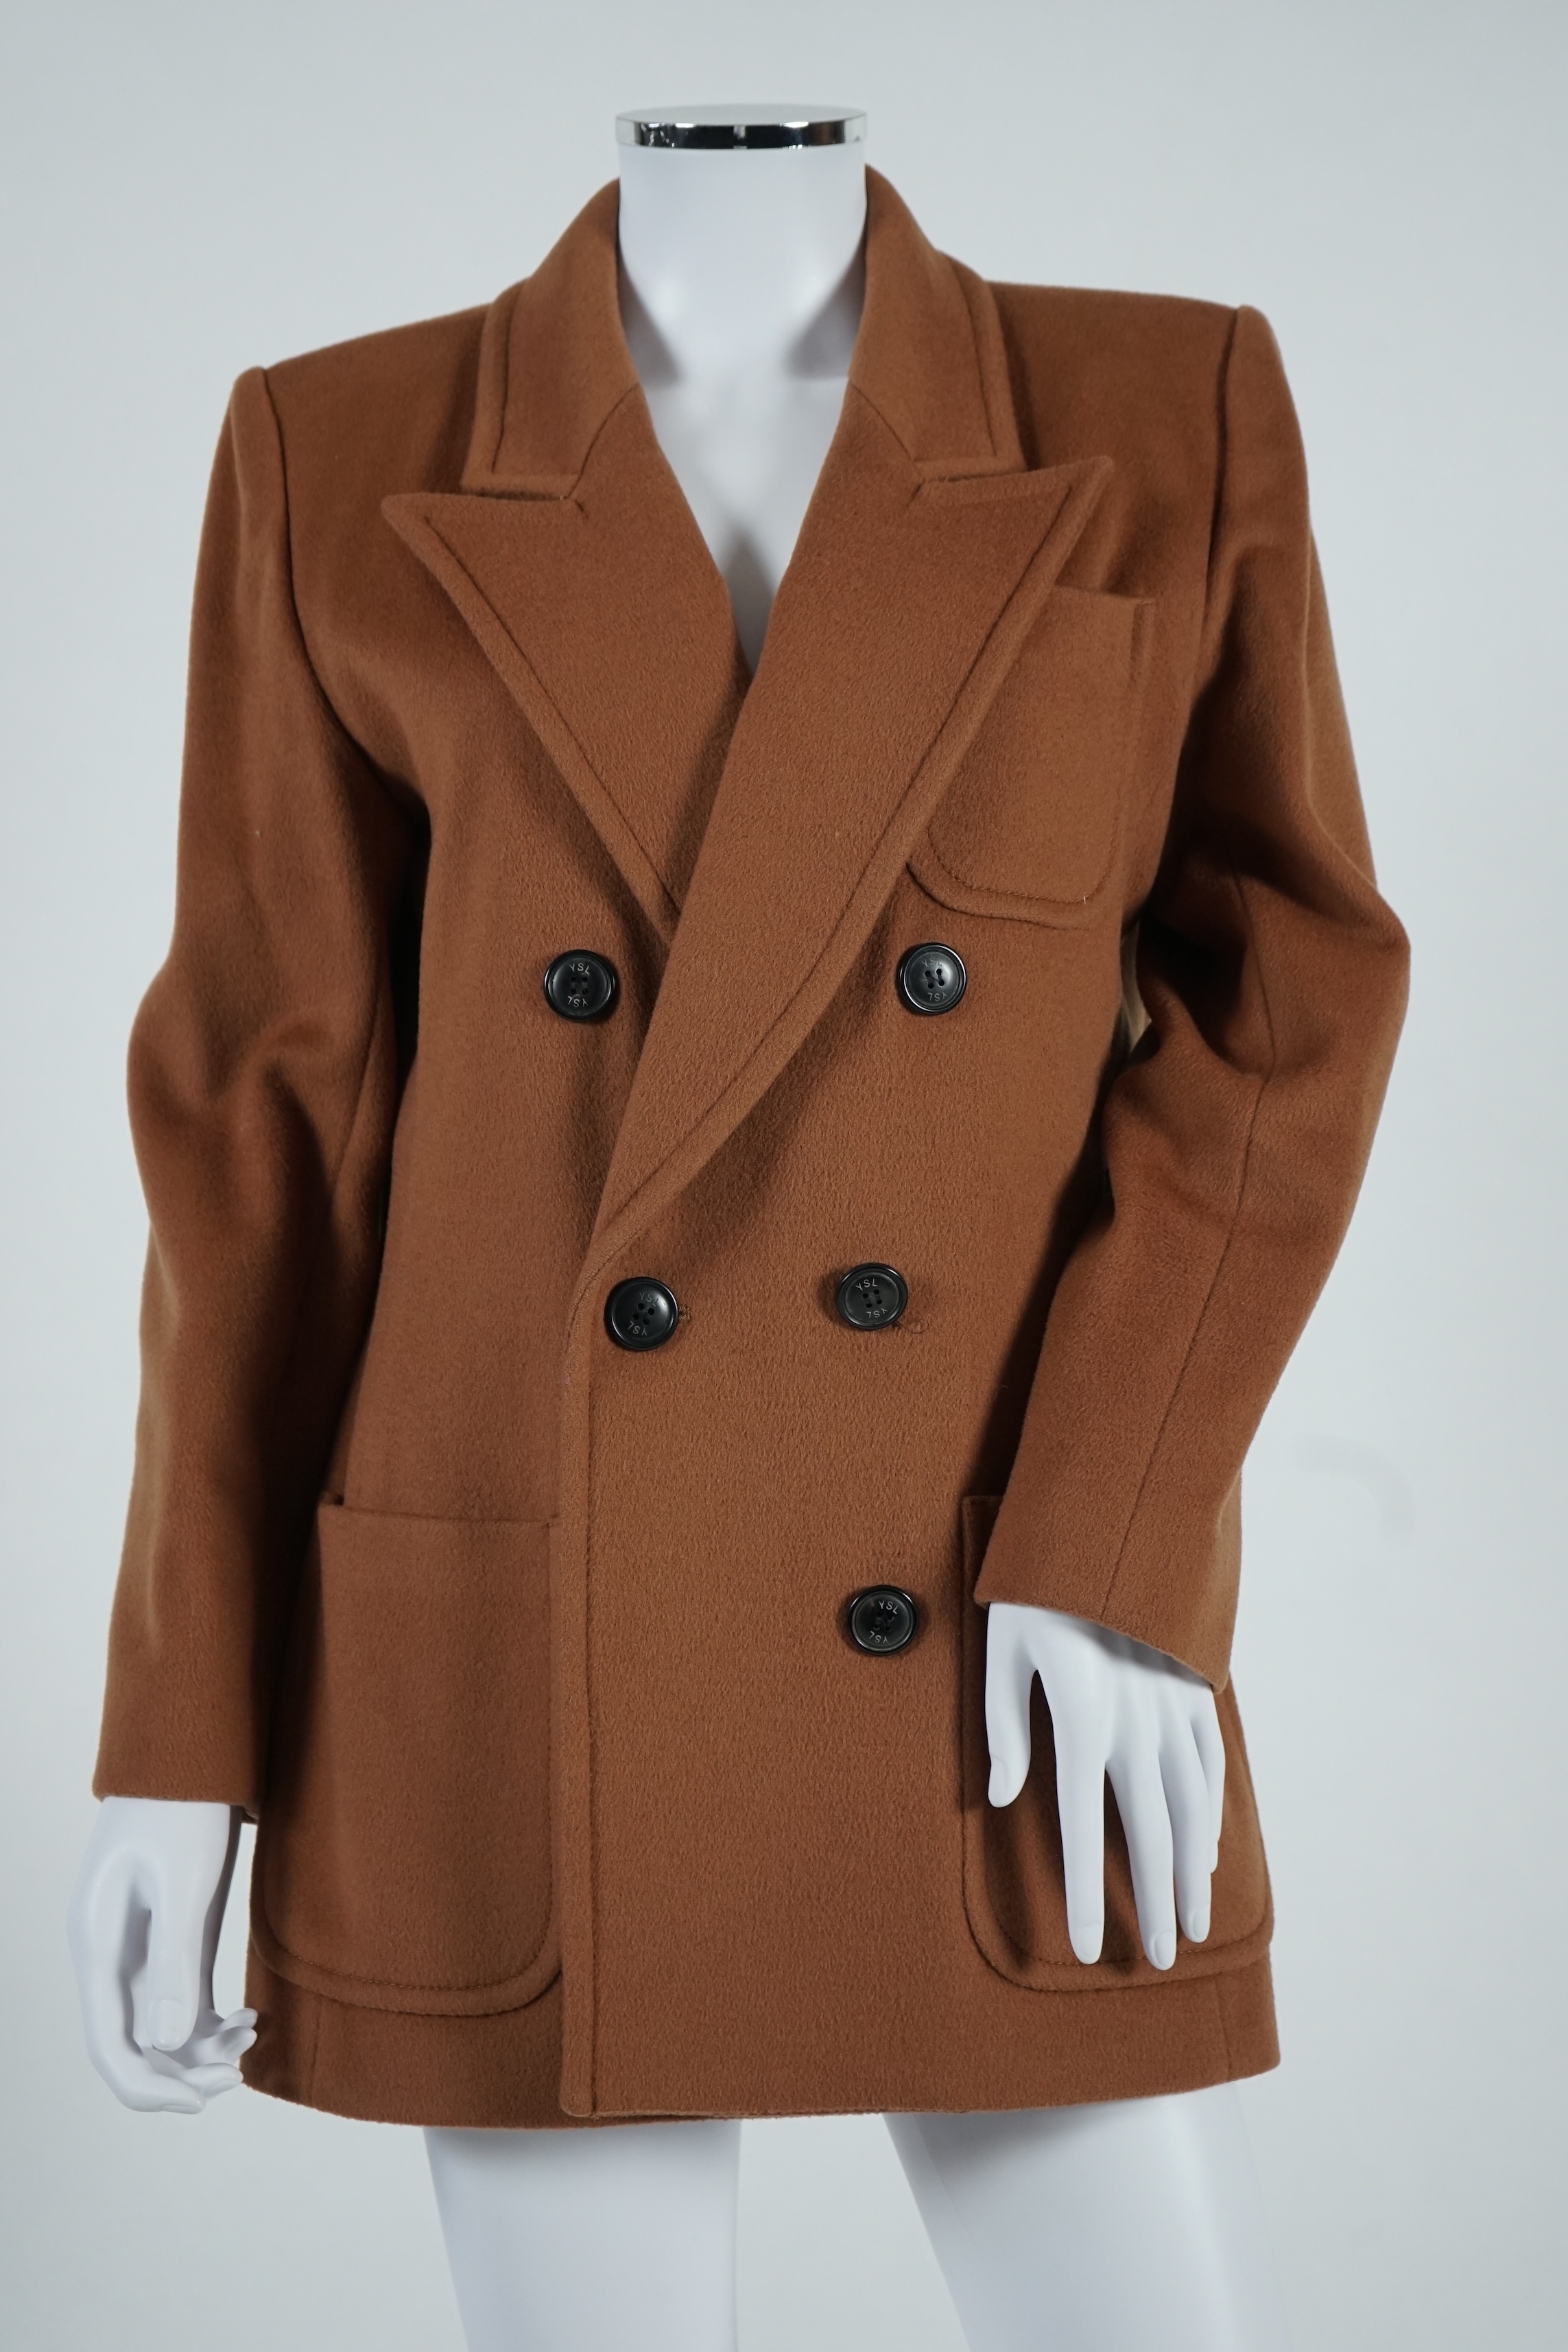 A vintage Yves Saint Laurent variation lady's dark tan double breasted coat, F 40 (UK 12). Proceeds to Happy Paws Puppy Rescue